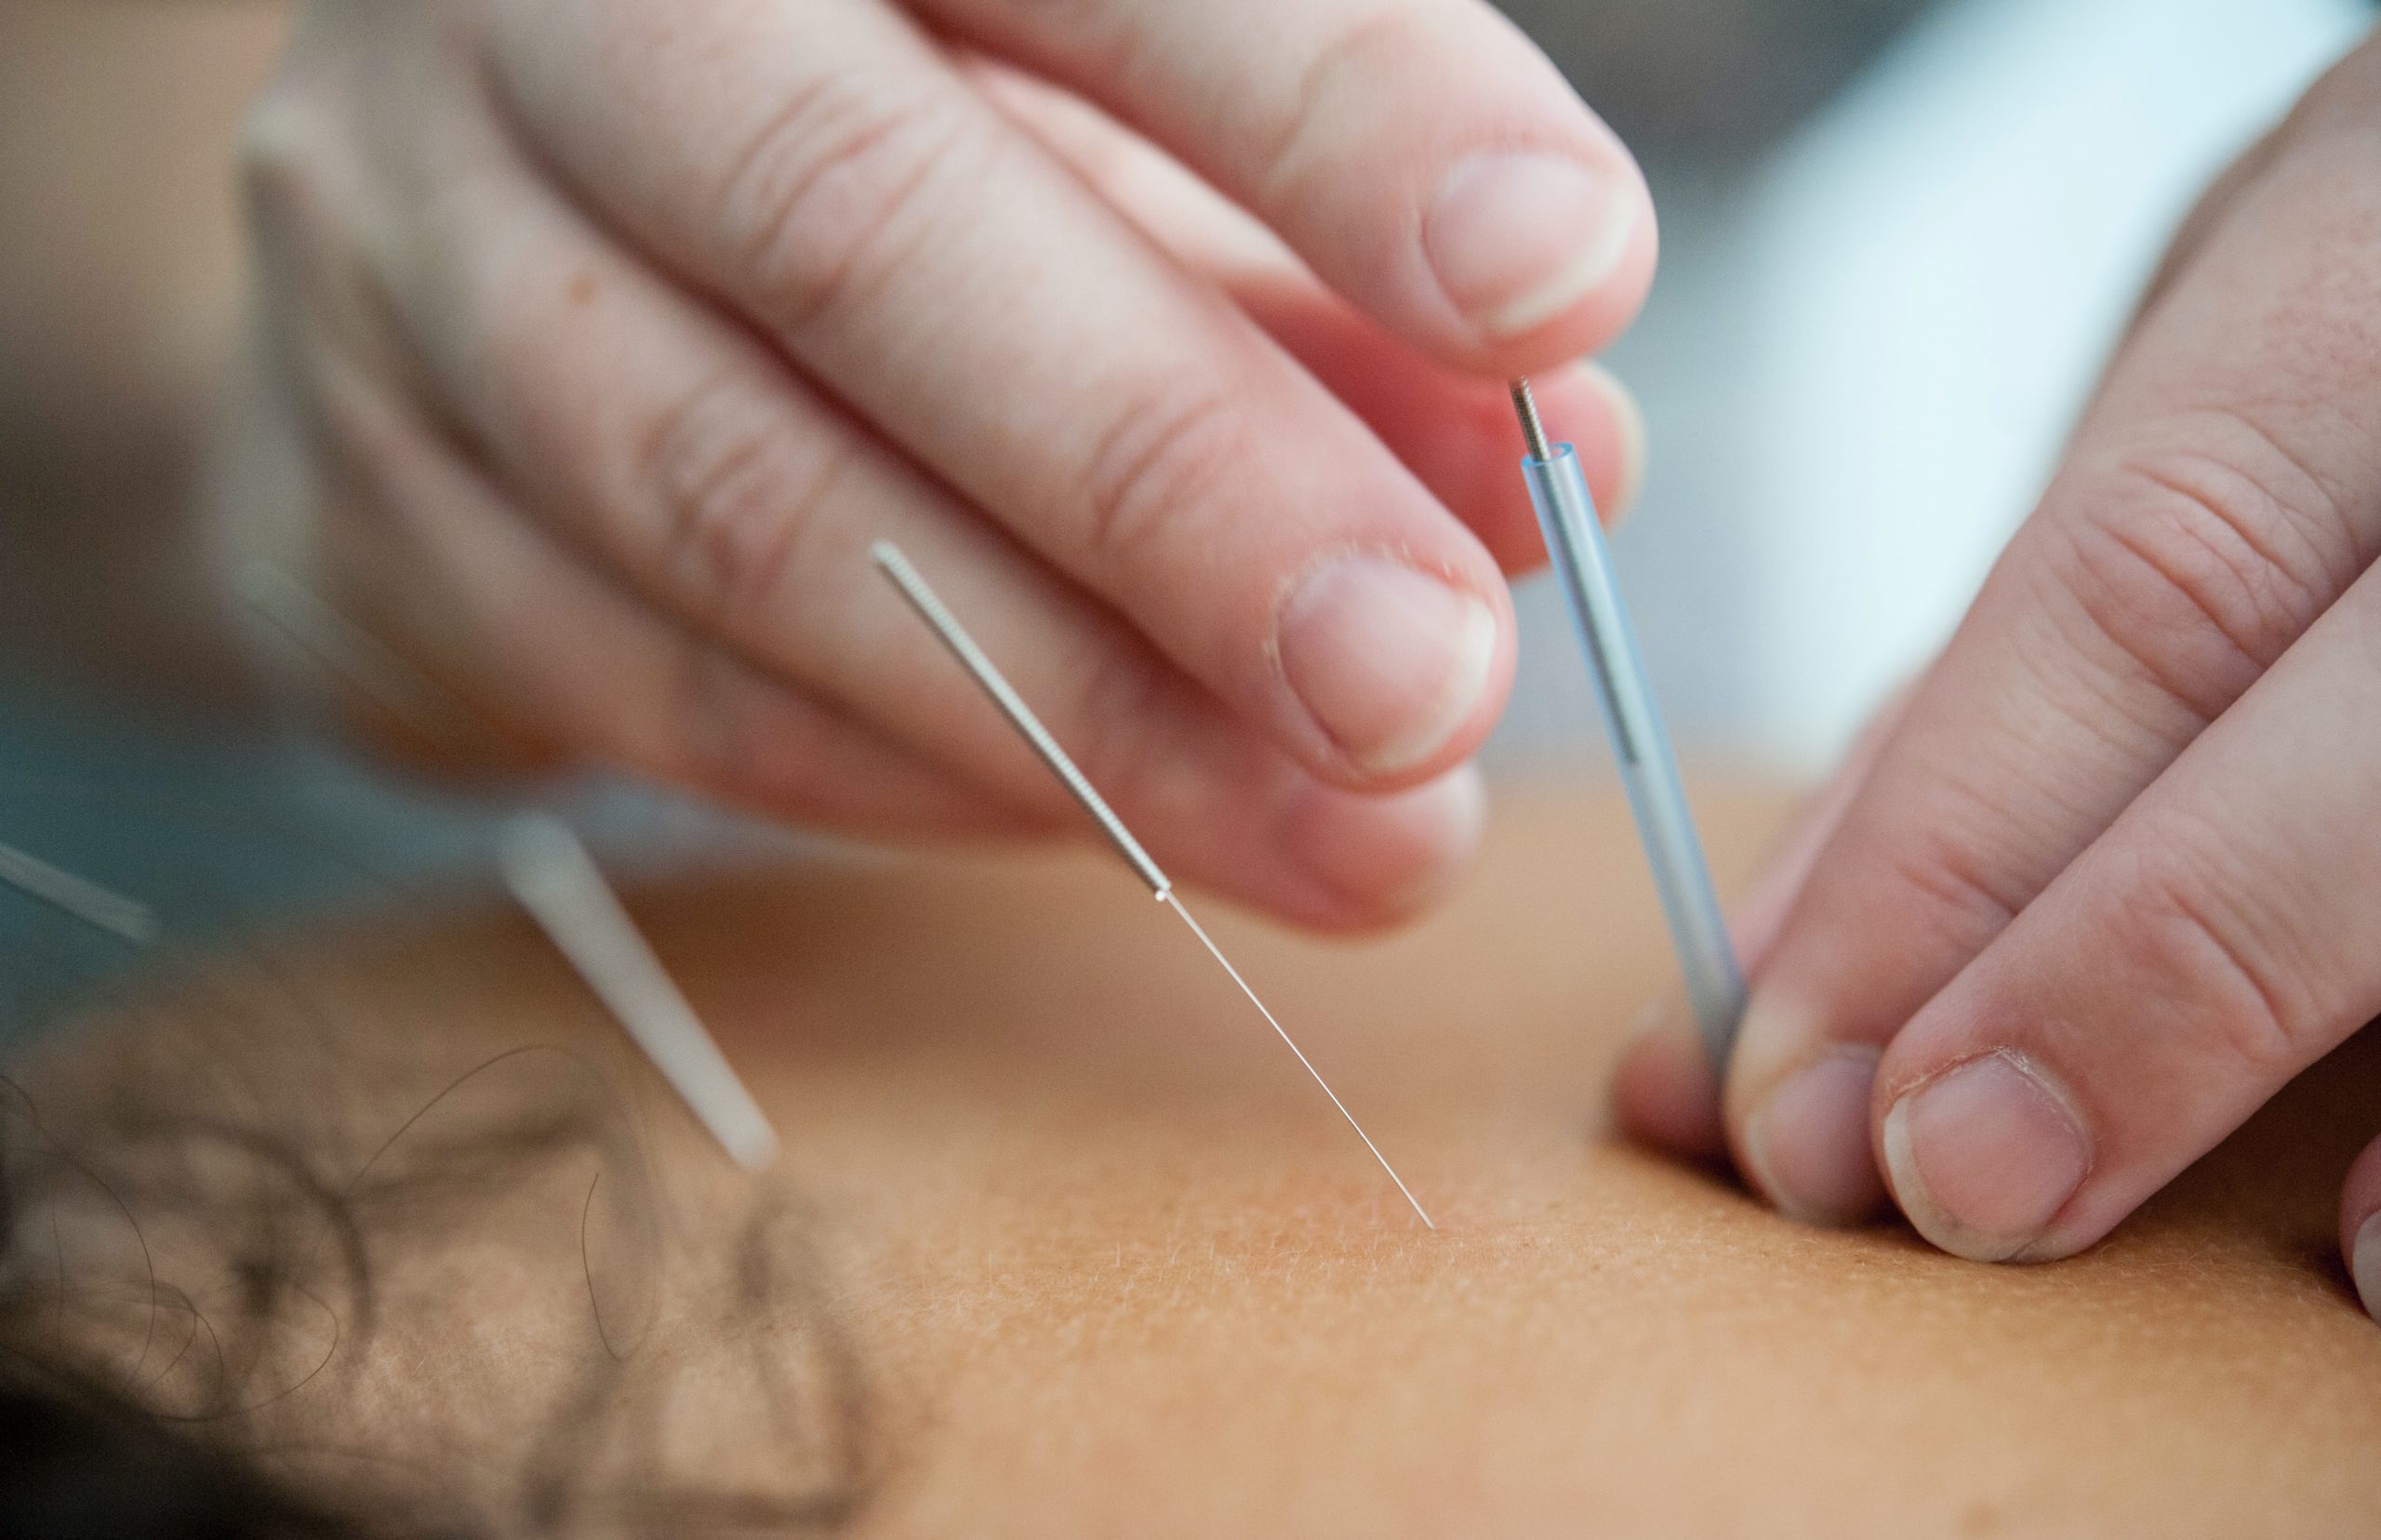 Acupuncture ancient healing